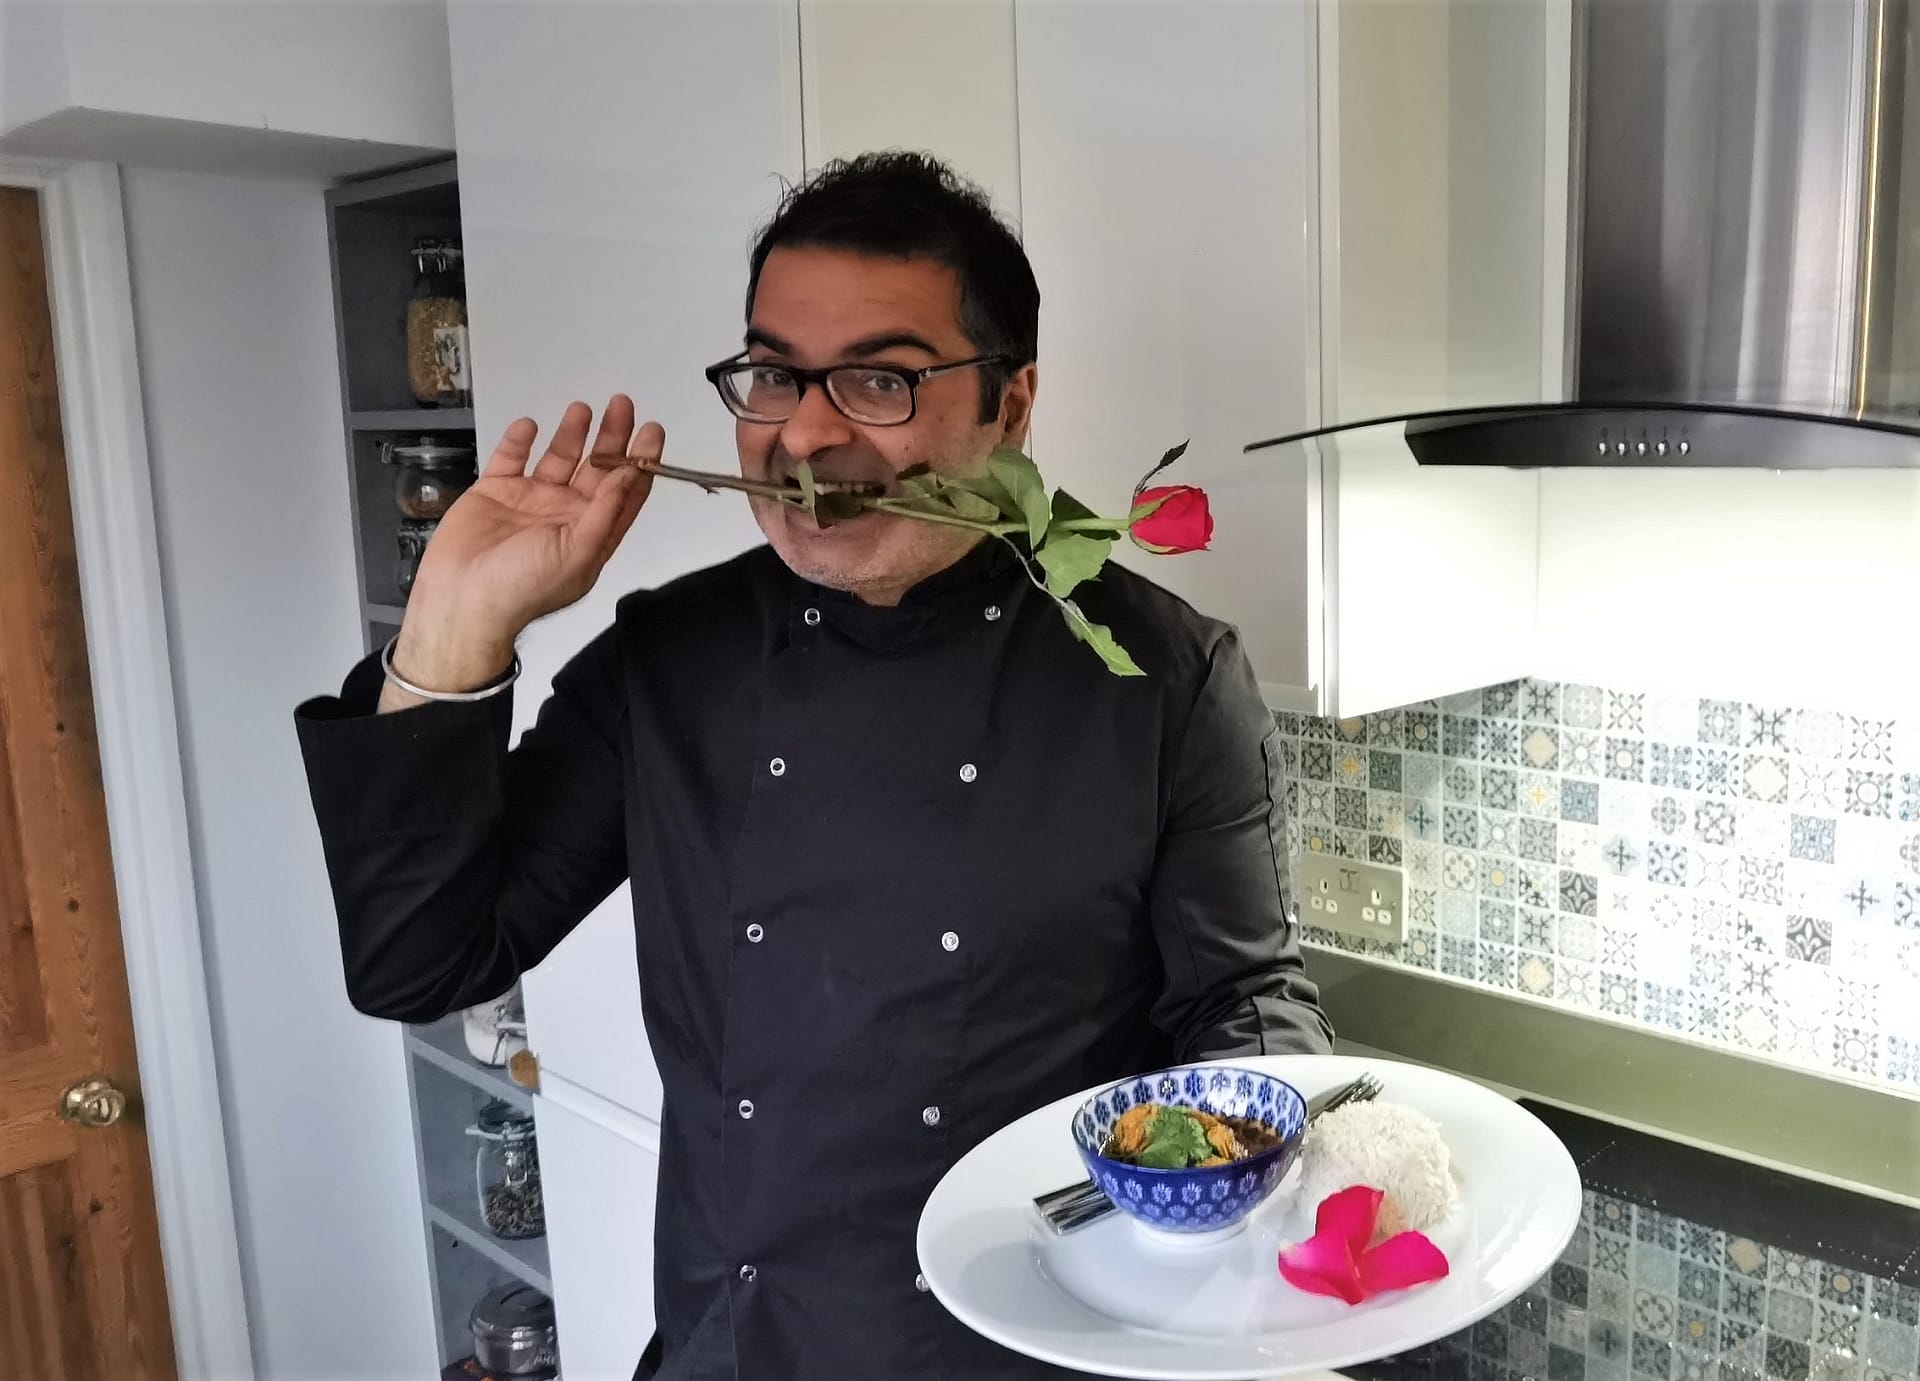 Celeb chef and A-list nutritionist Gurpareet Bains hits the national headlines after creating another world first - a special Valentine's Day curry that promises to ignite a fire in our hearts, and not our bottoms, on February 14th.